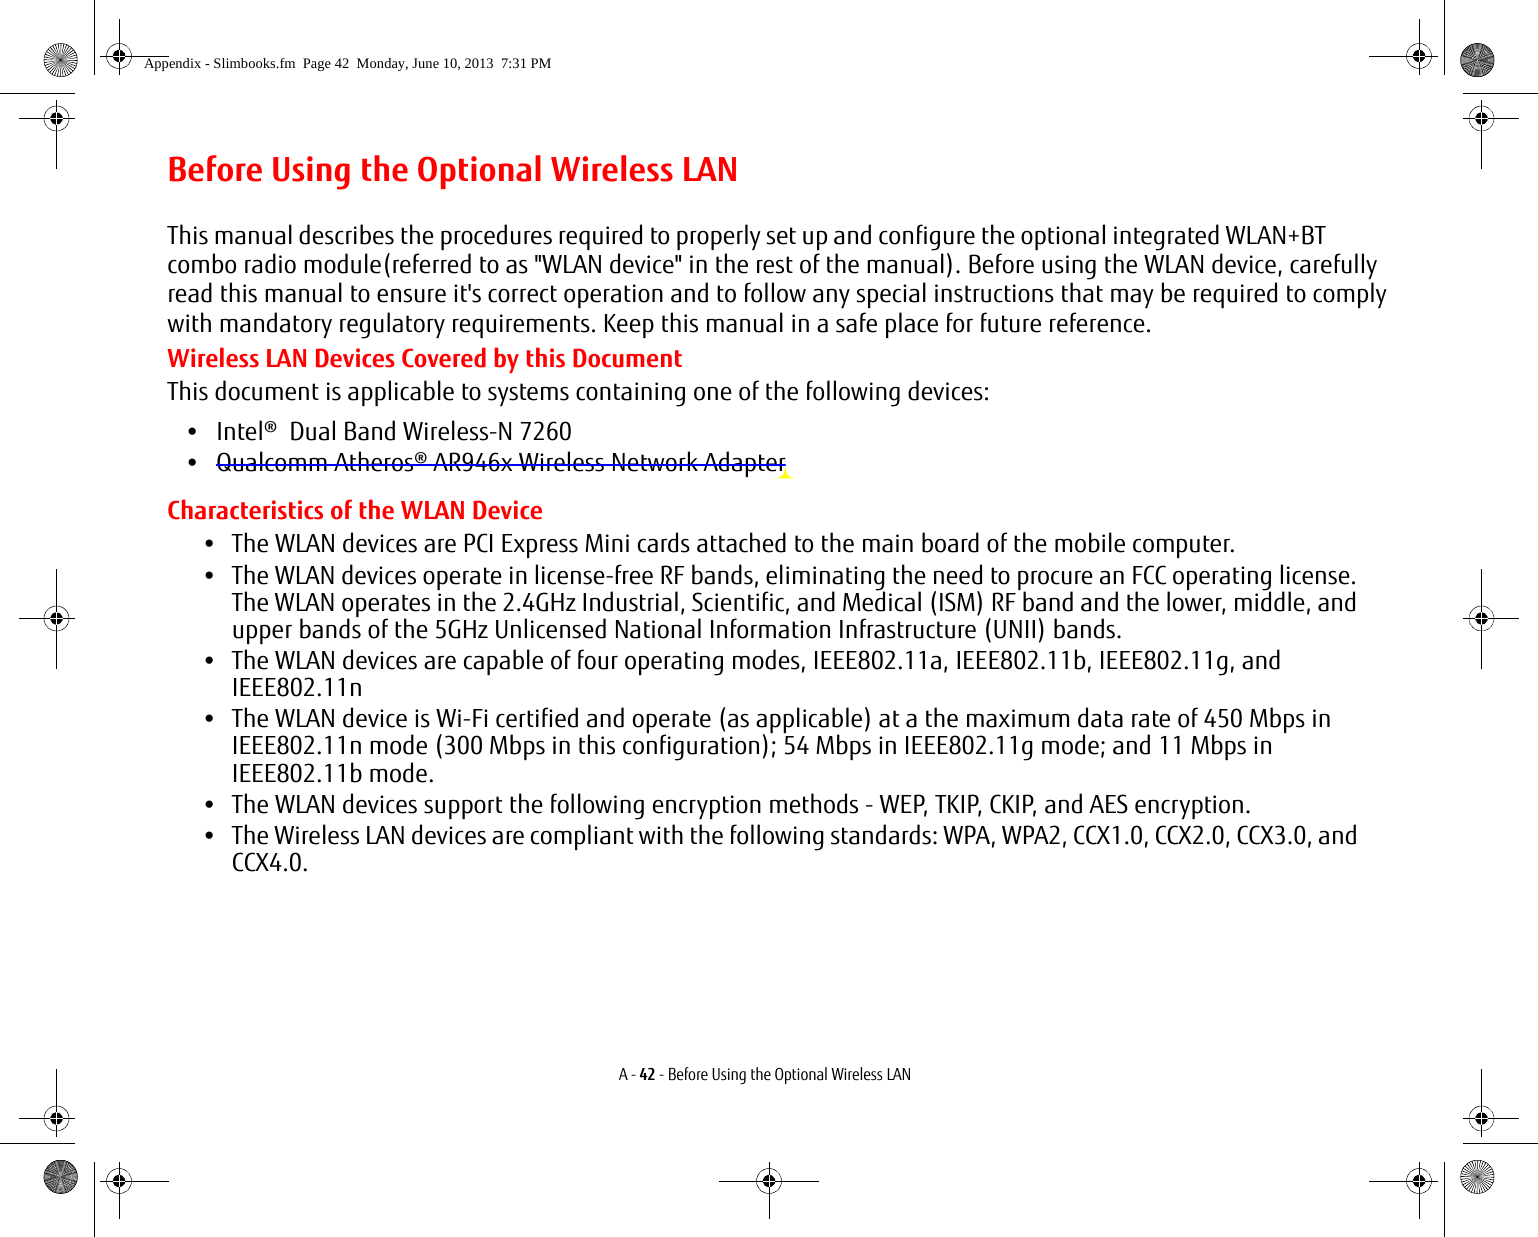 A - 42 - Before Using the Optional Wireless LANBefore Using the Optional Wireless LANThis manual describes the procedures required to properly set up and configure the optional integrated WLAN+BT combo radio module(referred to as &quot;WLAN device&quot; in the rest of the manual). Before using the WLAN device, carefullyread this manual to ensure it&apos;s correct operation and to follow any special instructions that may be required to complywith mandatory regulatory requirements. Keep this manual in a safe place for future reference. Wireless LAN Devices Covered by this DocumentThis document is applicable to systems containing one of the following devices:•   Intel®  Dual Band Wireless-N 7260•   Qualcomm Atheros® AR946x Wireless Network AdapterCharacteristics of the WLAN Device•The WLAN devices are PCI Express Mini cards attached to the main board of the mobile computer. •The WLAN devices operate in license-free RF bands, eliminating the need to procure an FCC operating license. The WLAN operates in the 2.4GHz Industrial, Scientific, and Medical (ISM) RF band and the lower, middle, and upper bands of the 5GHz Unlicensed National Information Infrastructure (UNII) bands. •The WLAN devices are capable of four operating modes, IEEE802.11a, IEEE802.11b, IEEE802.11g, and IEEE802.11n•The WLAN device is Wi-Fi certified and operate (as applicable) at a the maximum data rate of 450 Mbps in IEEE802.11n mode (300 Mbps in this configuration); 54 Mbps in IEEE802.11g mode; and 11 Mbps in IEEE802.11b mode.•The WLAN devices support the following encryption methods - WEP, TKIP, CKIP, and AES encryption.•The Wireless LAN devices are compliant with the following standards: WPA, WPA2, CCX1.0, CCX2.0, CCX3.0, and CCX4.0.Appendix - Slimbooks.fm  Page 42  Monday, June 10, 2013  7:31 PM